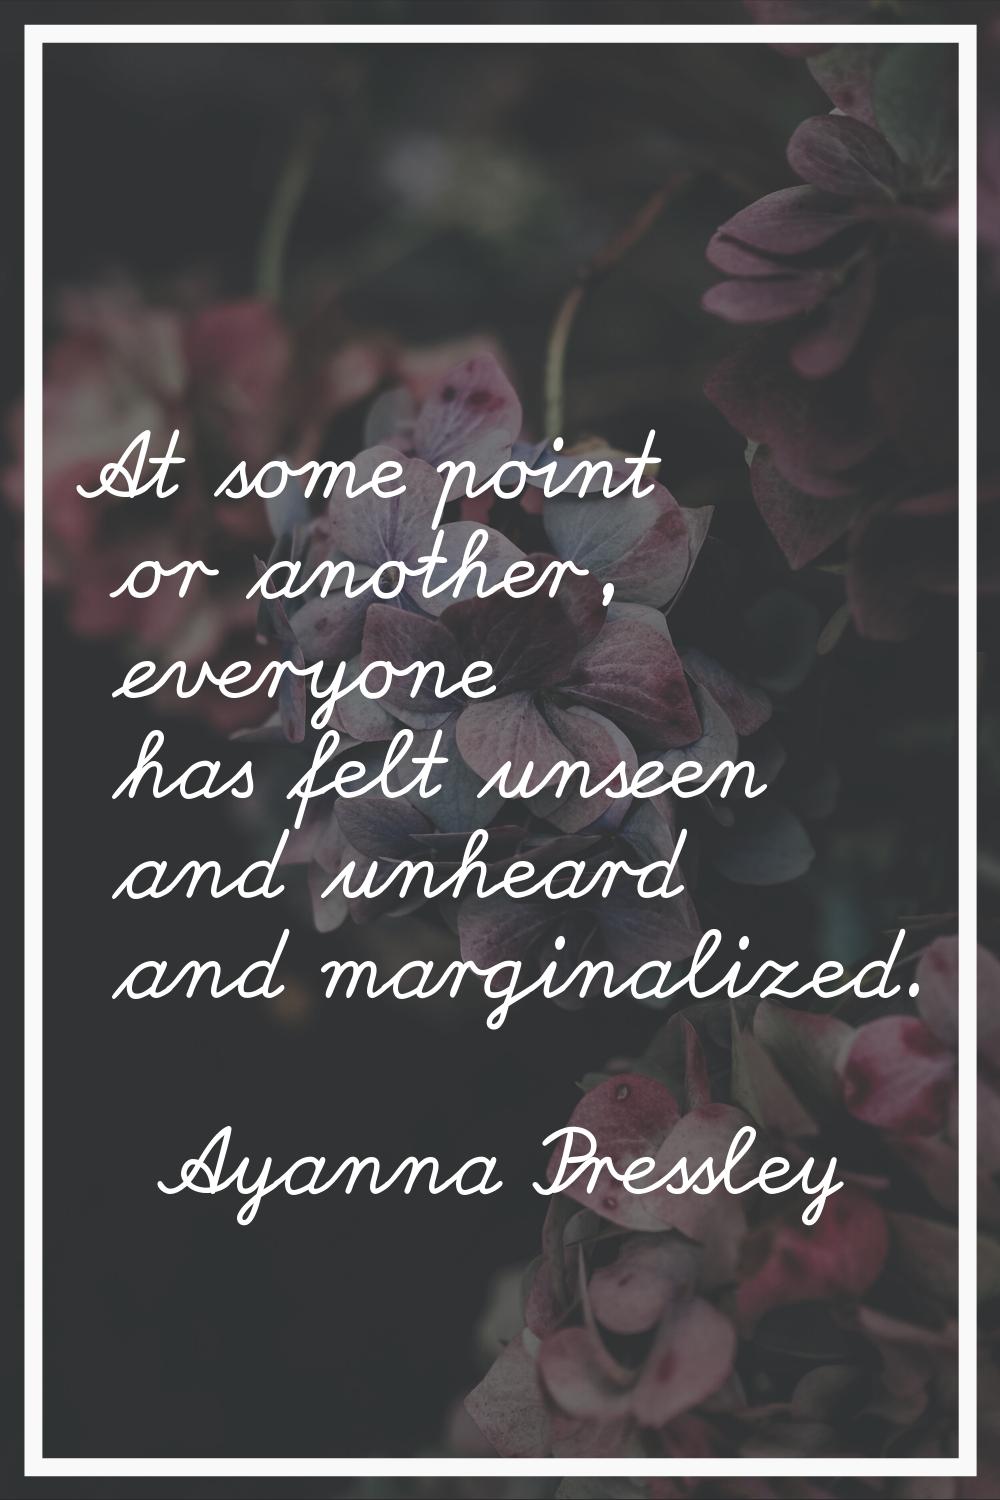 At some point or another, everyone has felt unseen and unheard and marginalized.